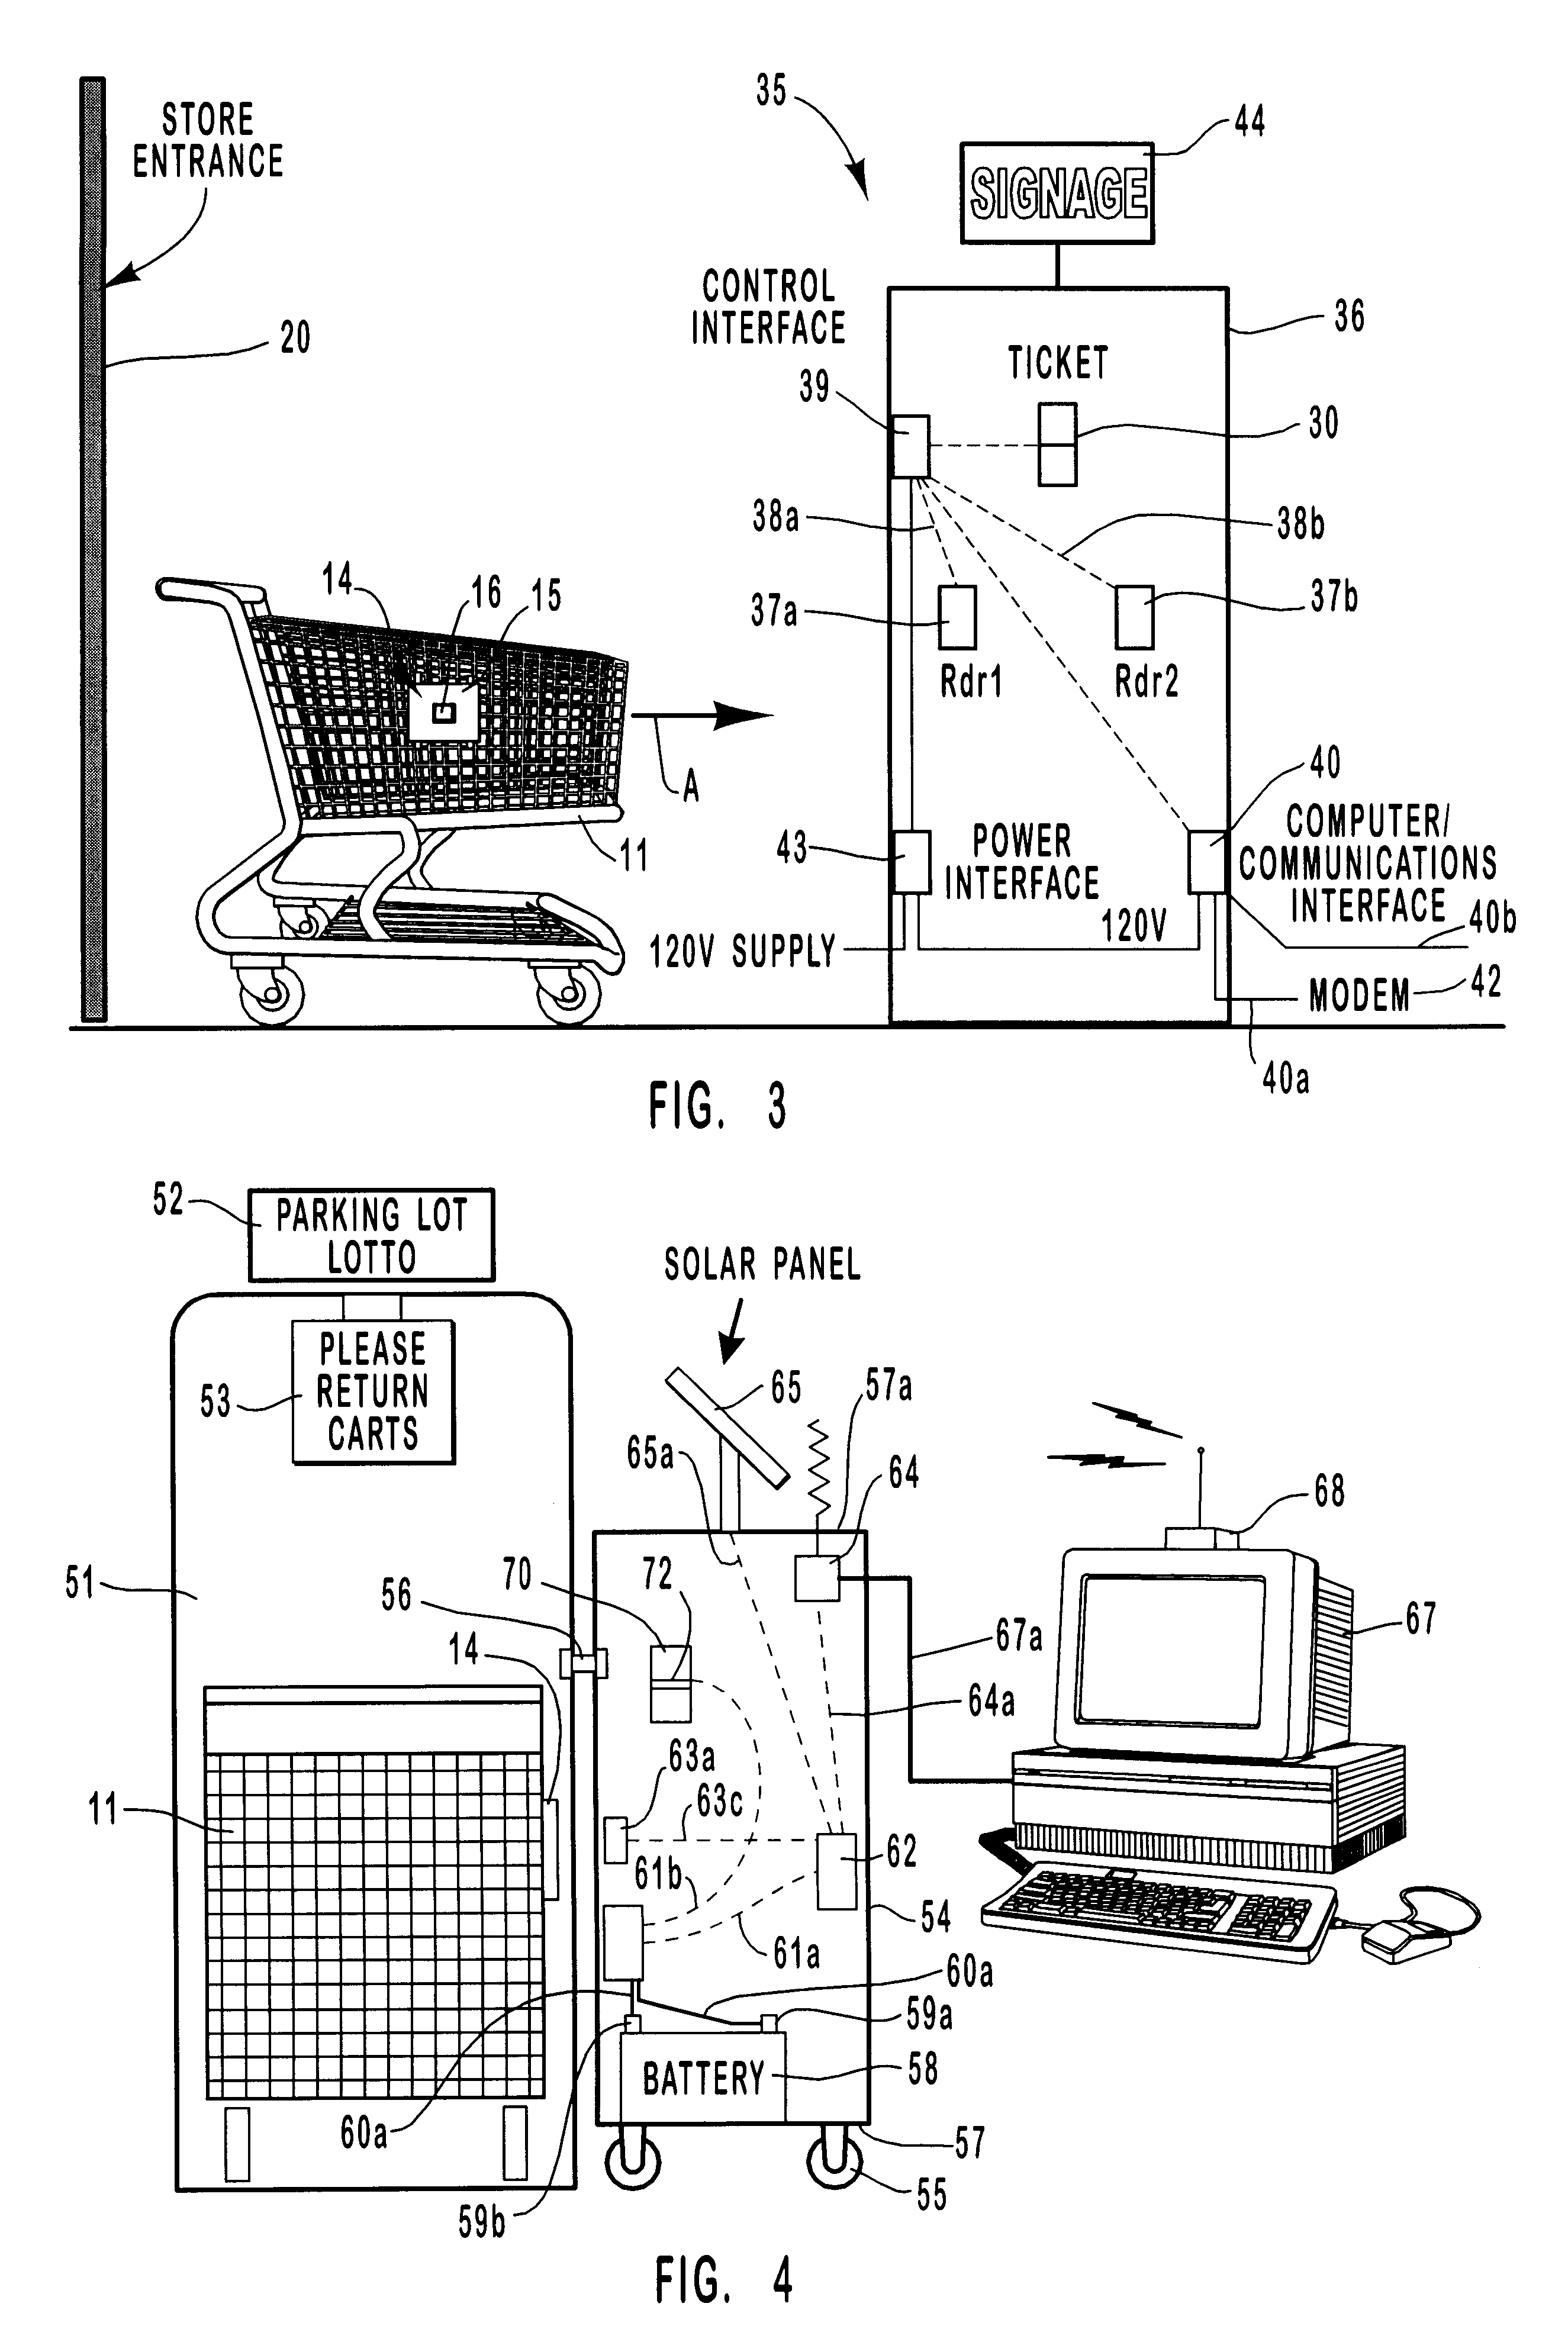 Detecting mechanism for a grocery cart and the like and system